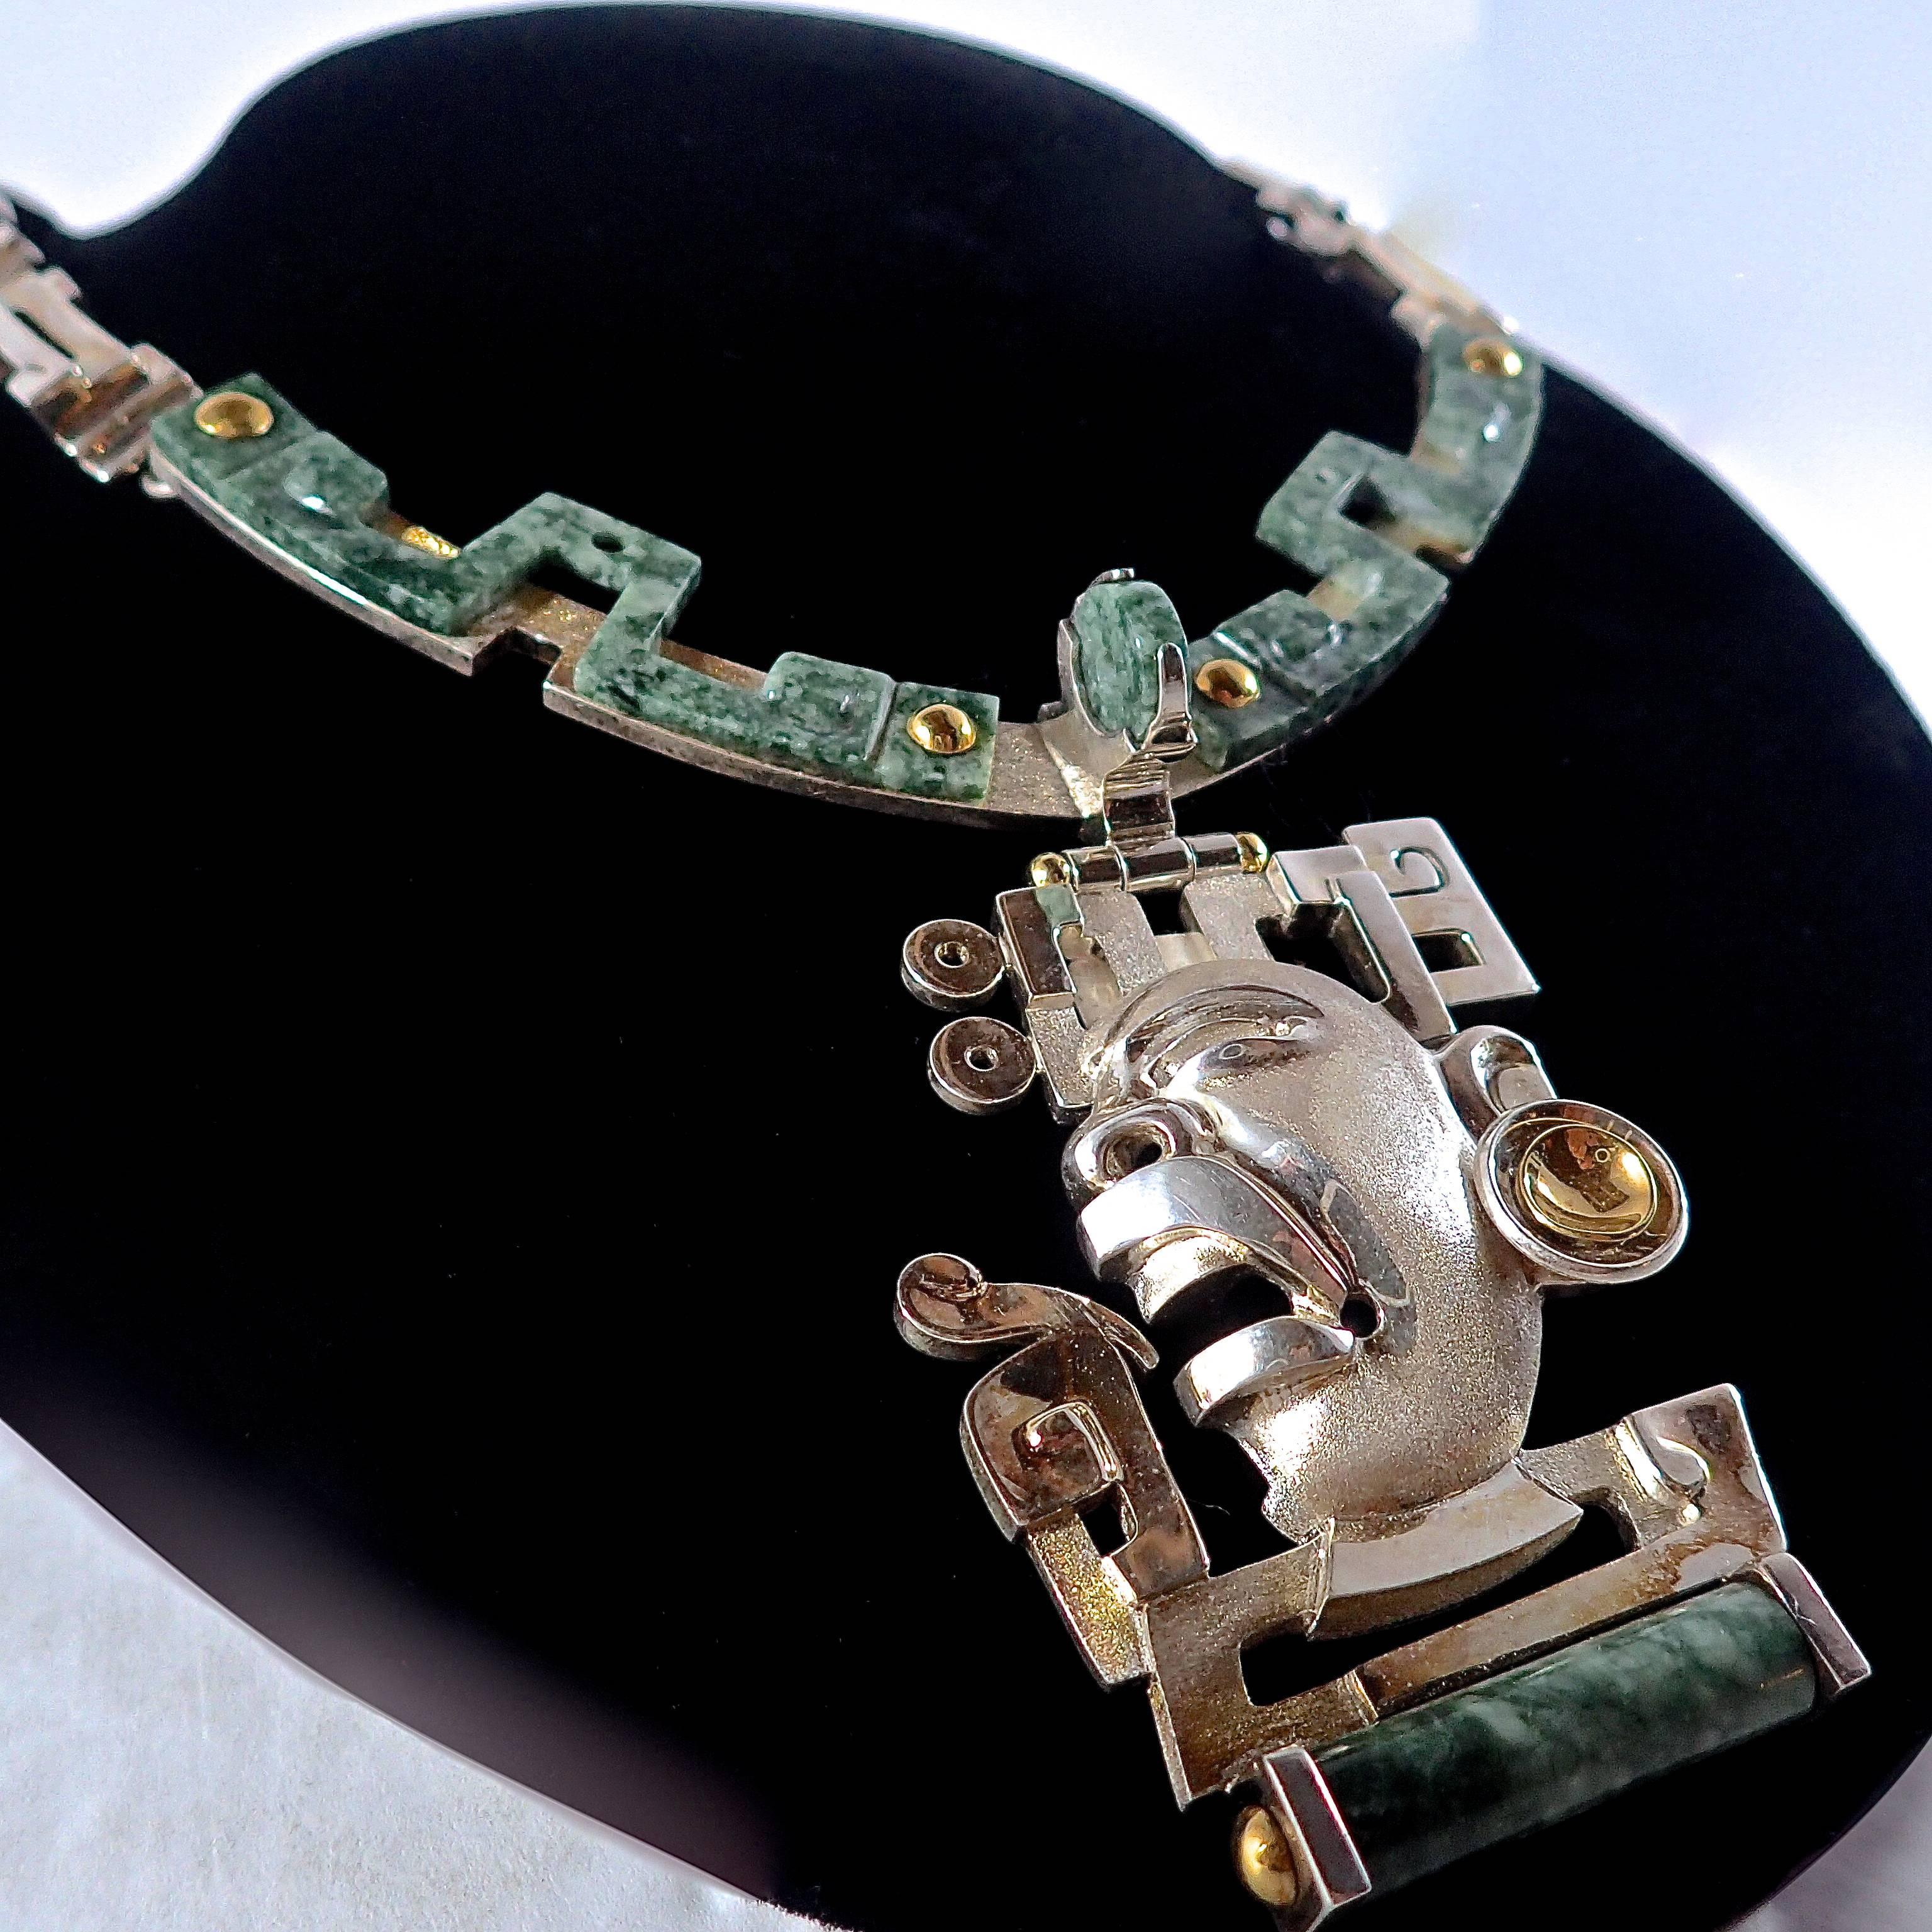 Olmec face inspired pendant-necklace featured with hand-cut Jade and accented with 22K gold. Completed with a hand crafted tension box clasp.

Creating his works completely by hand, these are one-of-a-kind pieces. Implementing various techniques